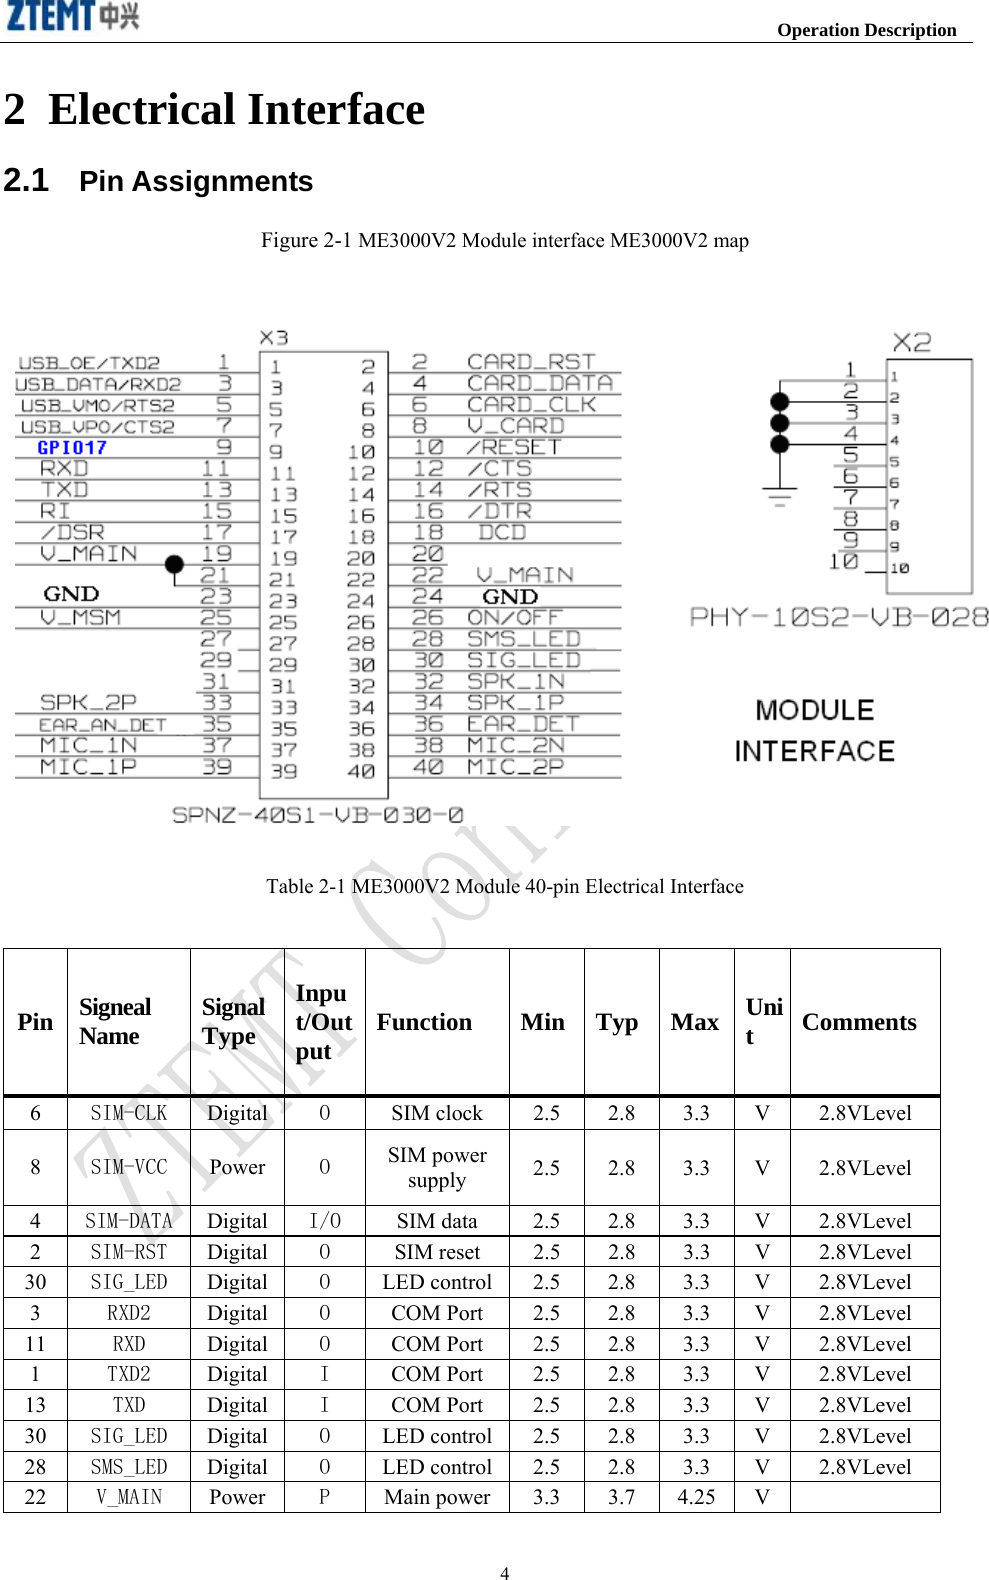                                                                     Operation Description  42 Electrical Interface 2.1  Pin Assignments Figure 2-1 ME3000V2 Module interface ME3000V2 map    Table 2-1 ME3000V2 Module 40-pin Electrical Interface  Pin  Signeal Name  Signal  Type Input/Output  Function Min Typ Max Unit  Comments 6  SIM-CLK Digital O  SIM clock 2.5 2.8 3.3 V 2.8VLevel 8  SIM-VCC  Power O  SIM power supply  2.5 2.8 3.3 V 2.8VLevel 4  SIM-DATA  Digital I/O  SIM data  2.5 2.8 3.3 V 2.8VLevel 2  SIM-RST  Digital O  SIM reset  2.5 2.8 3.3 V 2.8VLevel 30  SIG_LED  Digital O  LED control 2.5 2.8 3.3 V 2.8VLevel 3  RXD2  Digital O  COM Port  2.5 2.8 3.3 V 2.8VLevel 11  RXD  Digital O  COM Port 2.5 2.8 3.3 V 2.8VLevel 1  TXD2  Digital I  COM Port  2.5 2.8 3.3 V 2.8VLevel 13  TXD  Digital I  COM Port 2.5 2.8 3.3 V 2.8VLevel 30  SIG_LED  Digital O  LED control 2.5 2.8 3.3 V 2.8VLevel 28  SMS_LED  Digital O  LED control 2.5 2.8 3.3 V 2.8VLevel 22  V_MAIN  Power P  Main power 3.3  3.7  4.25 V   